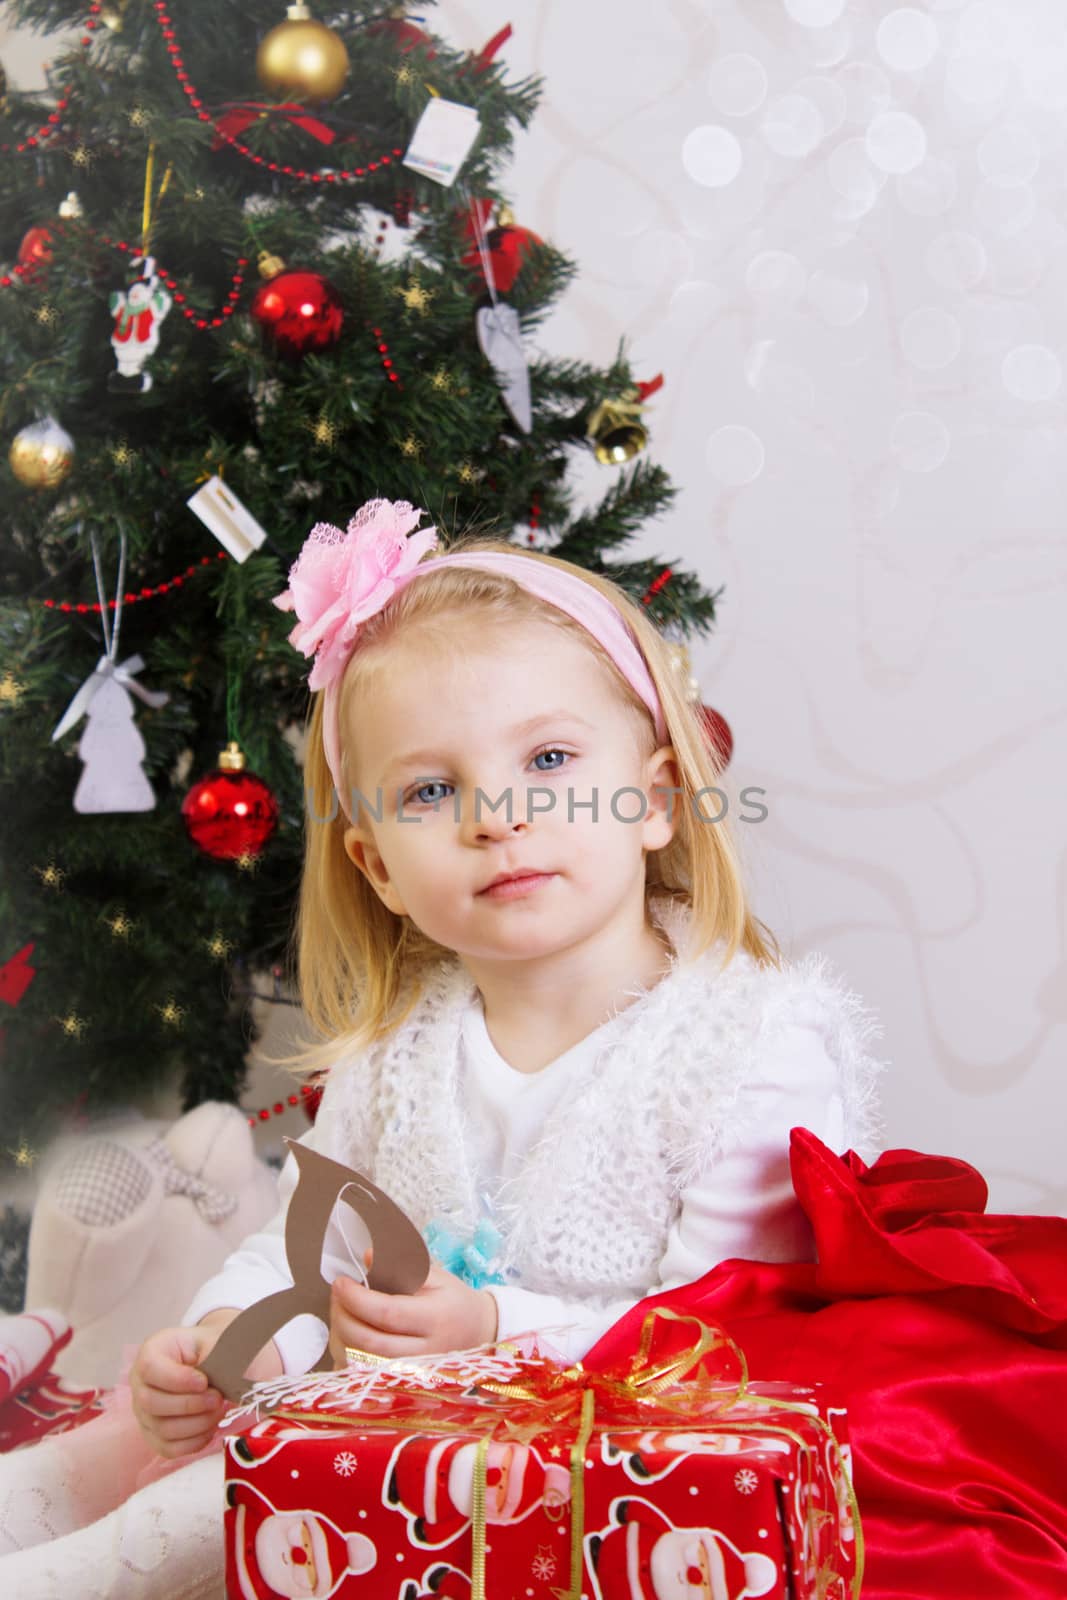 Adorable girl in pink under Christmas tree with gifts